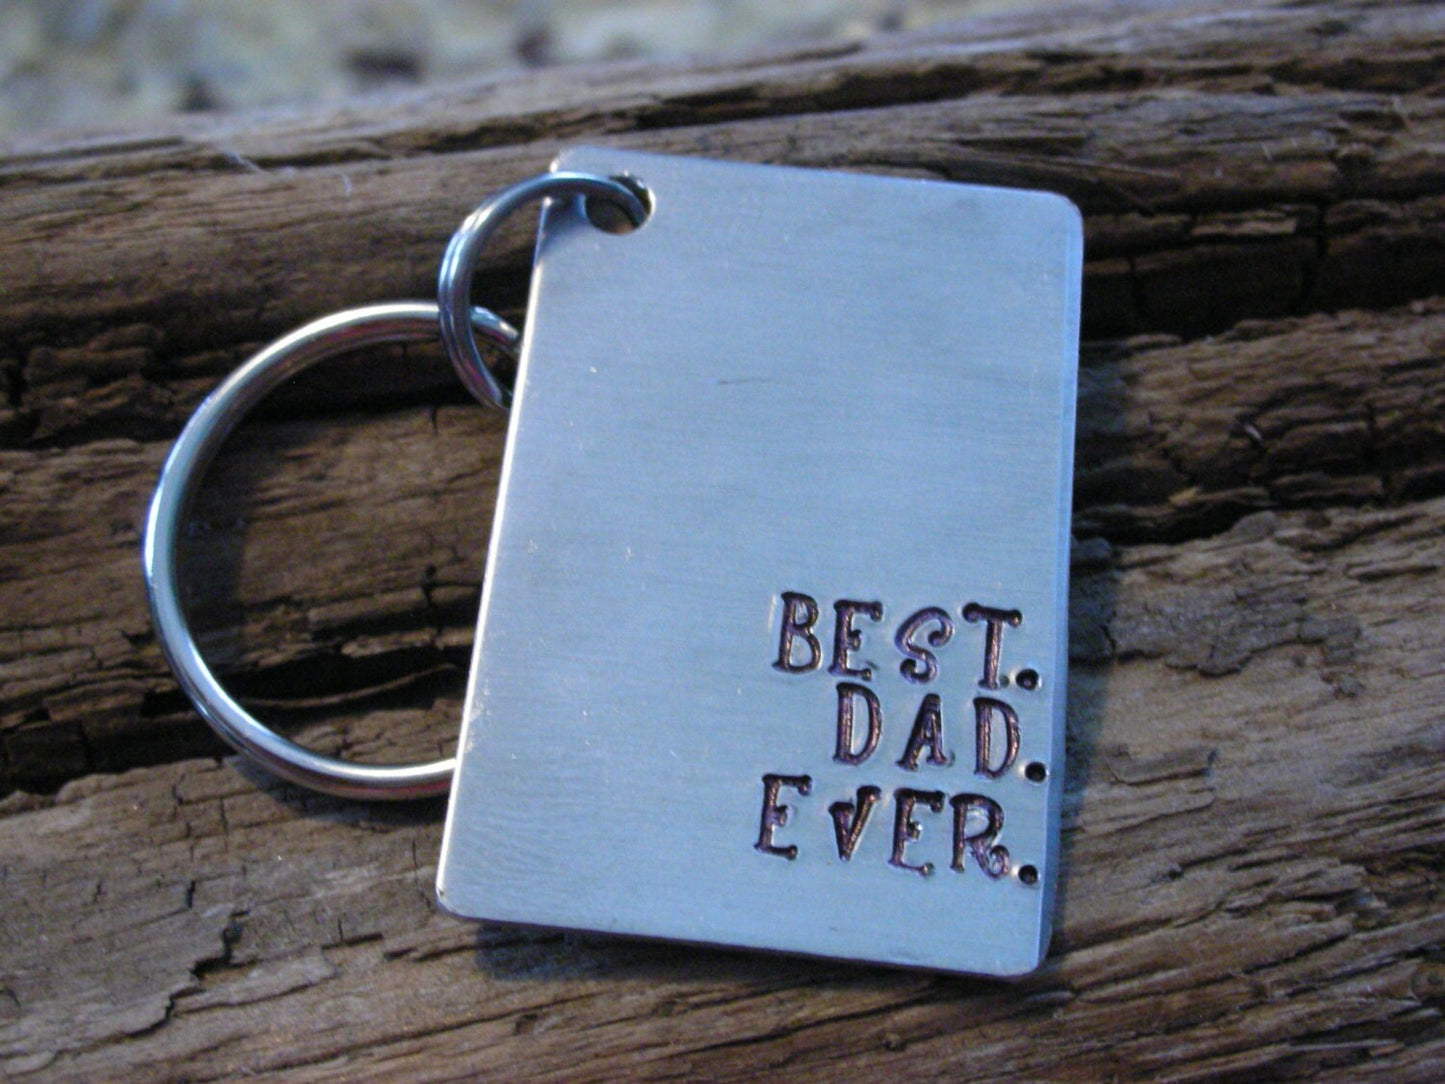 best.dad.ever. keychain -Fathers Day Keychain-Gift for Dad-Custom Handstamped Personalized Keychain